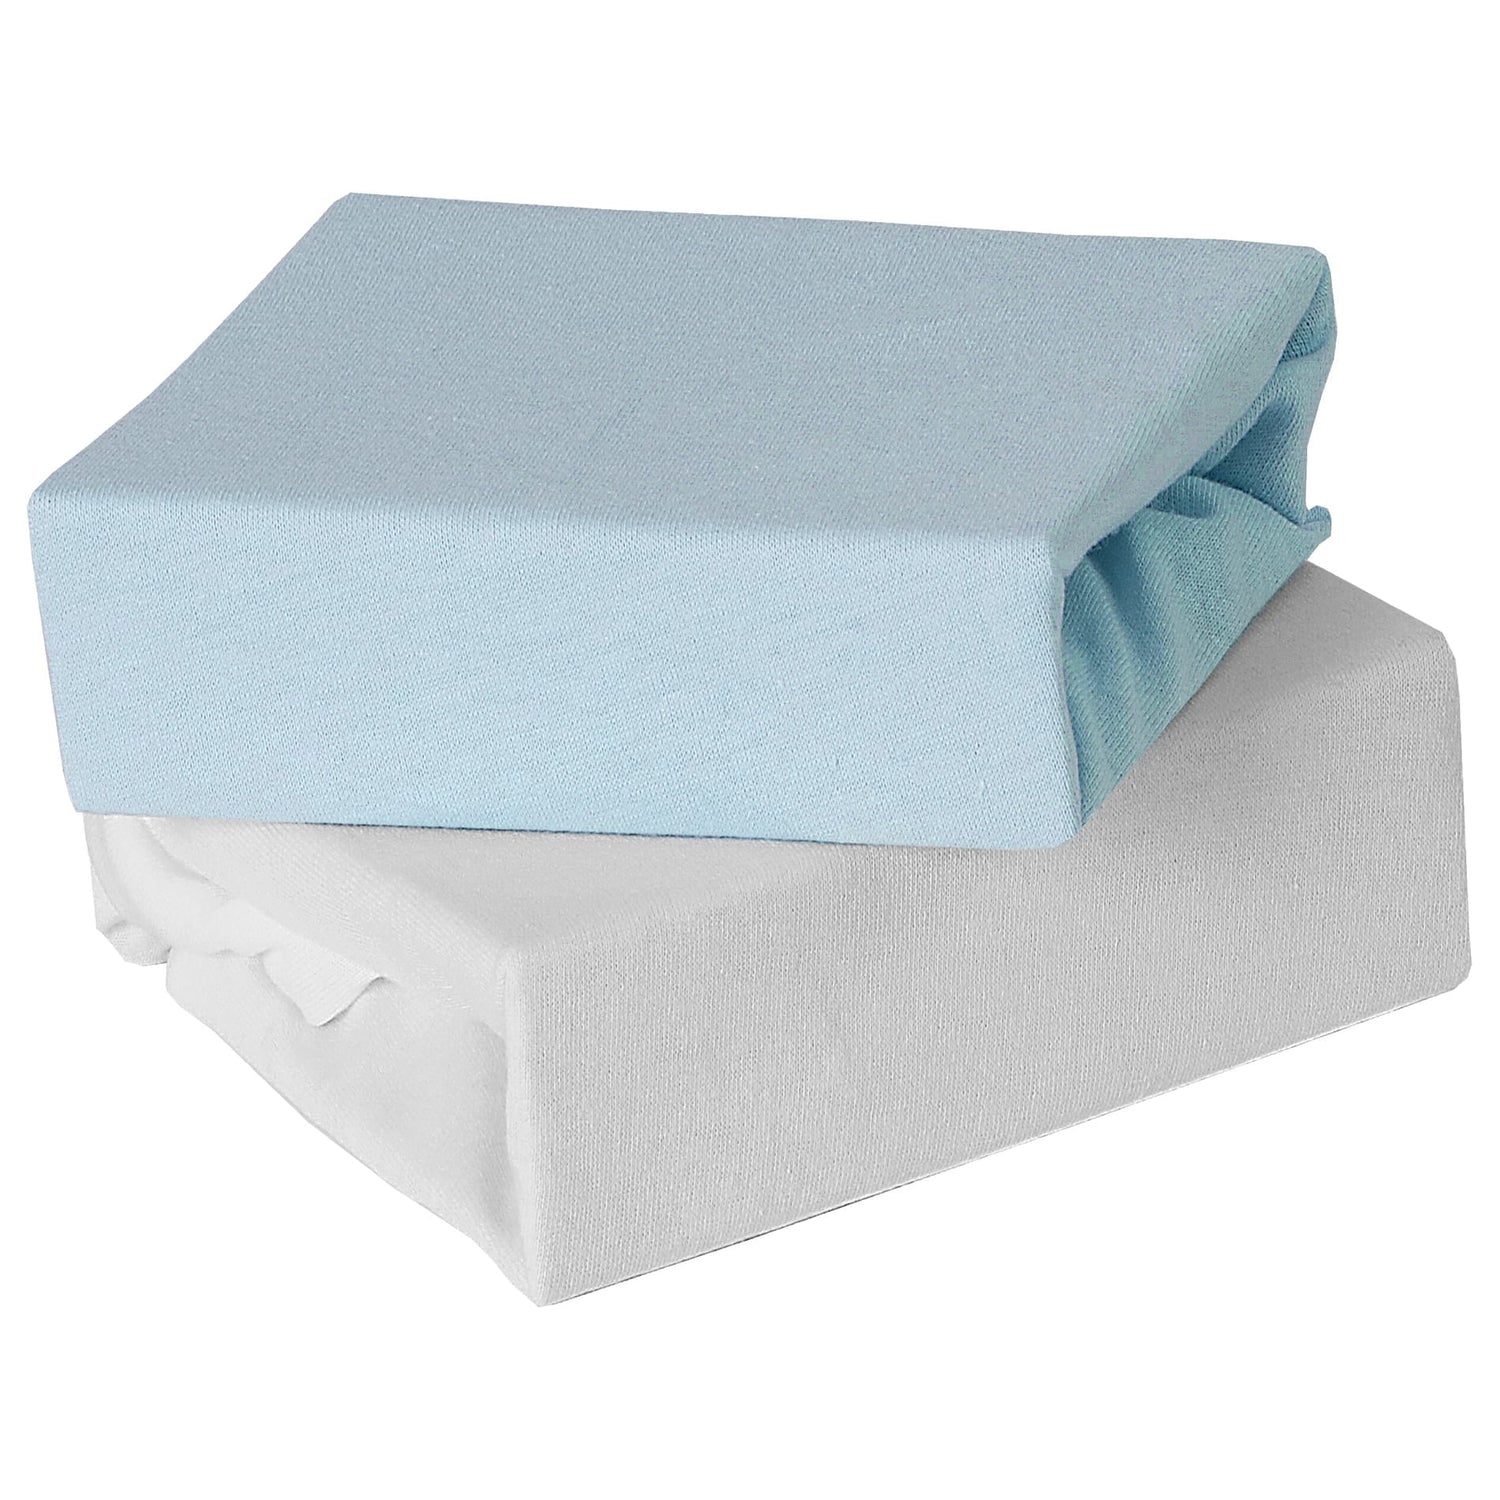 Baby Elegance 2 Pack Sheets - Travel Cot